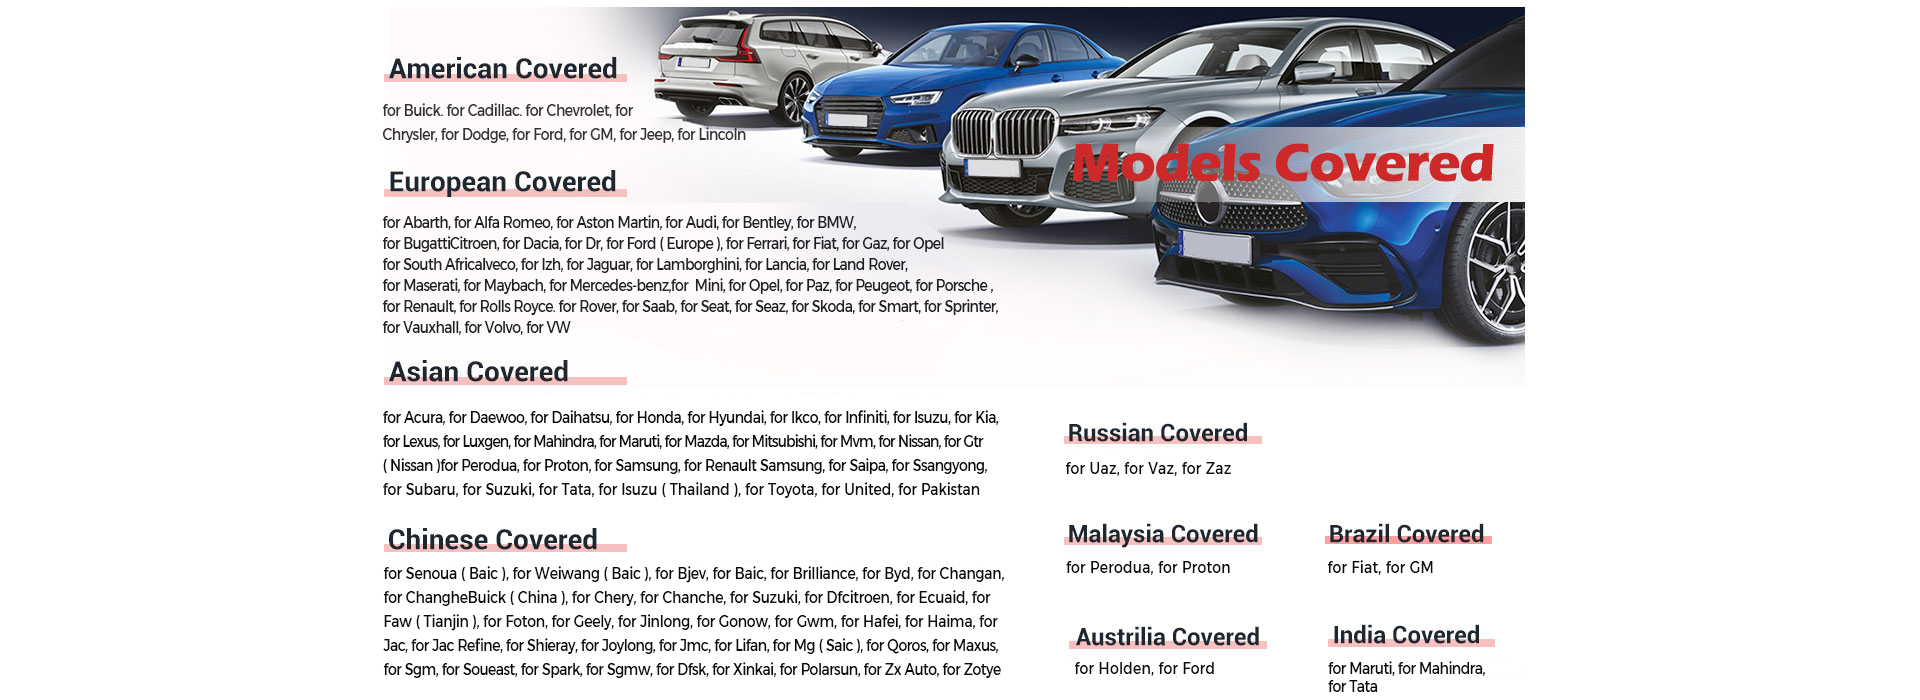 Supports 10000+ car models from America, Europe, Asia